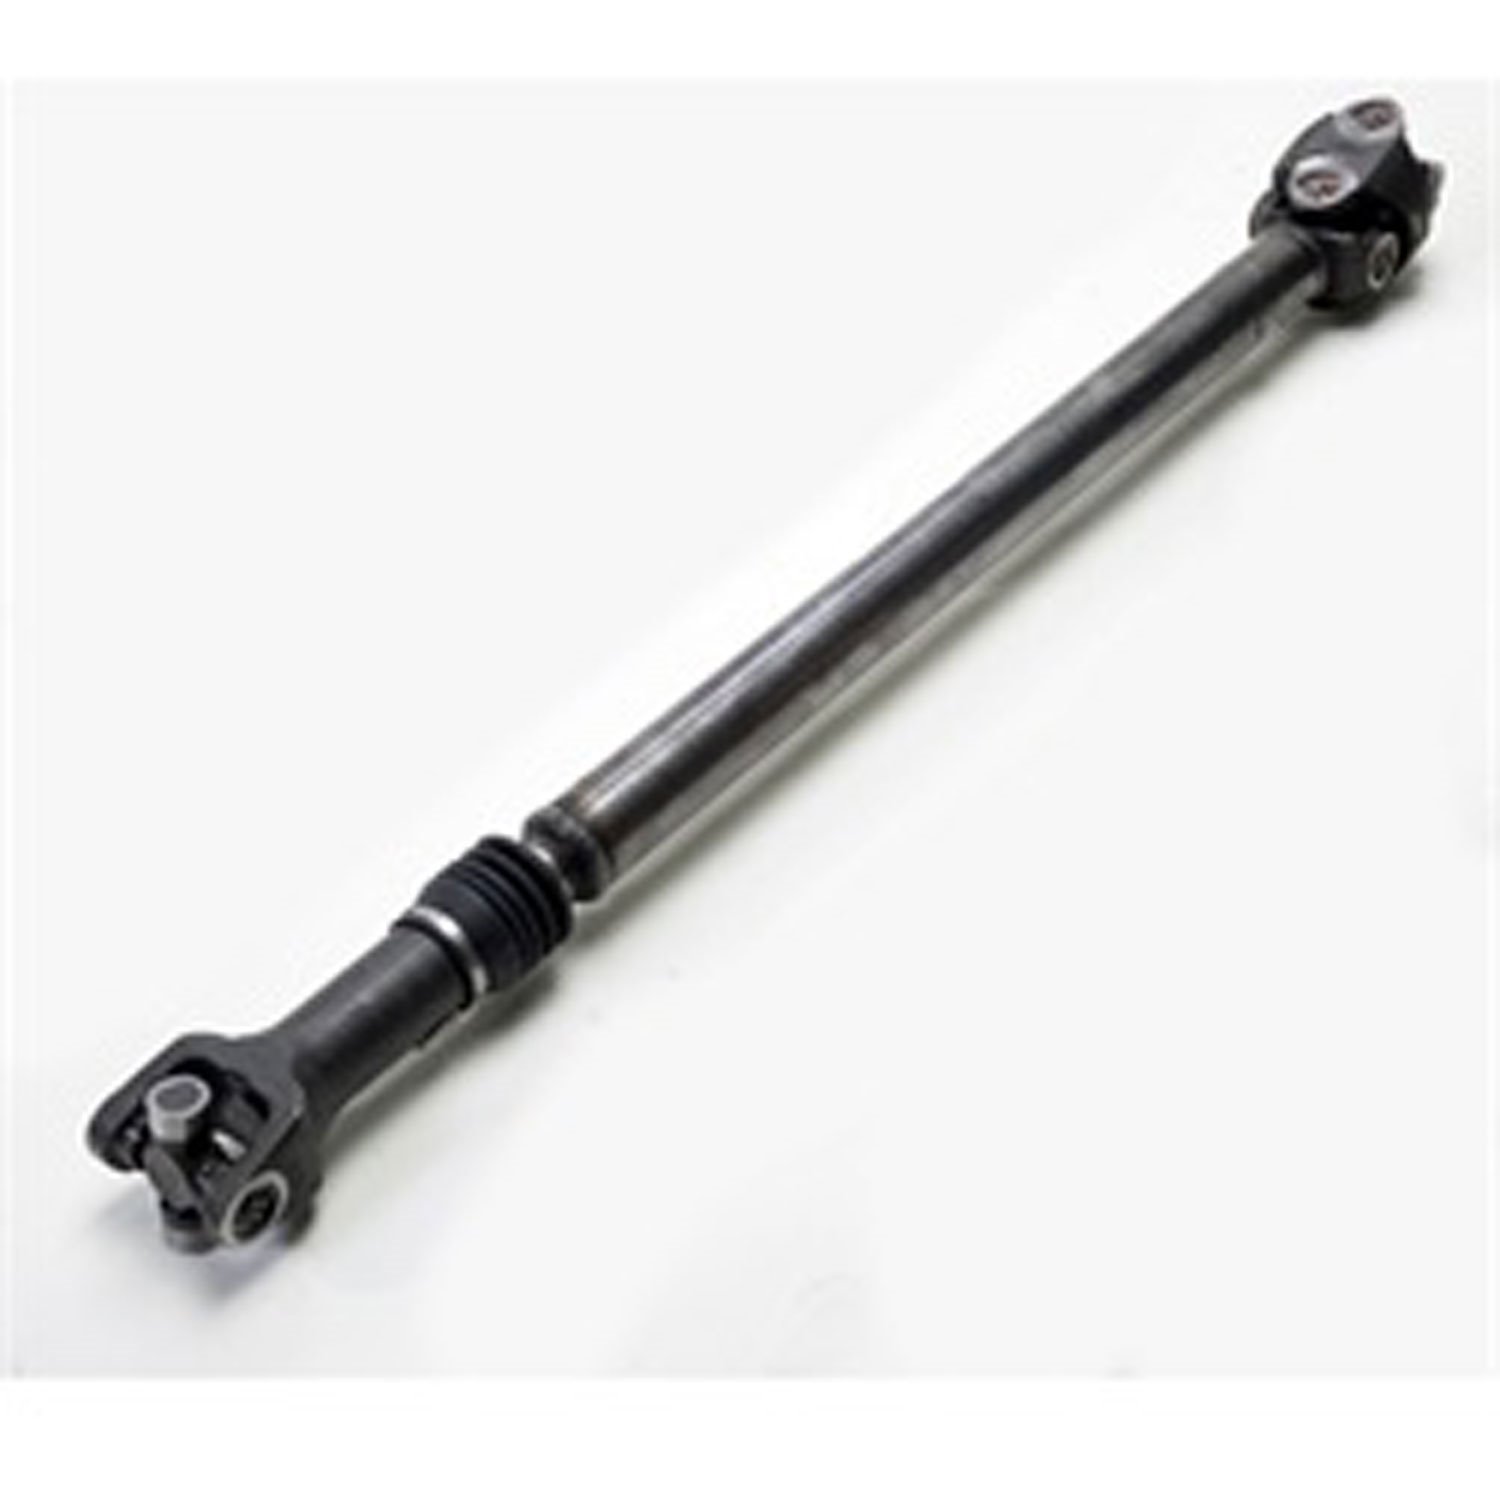 This front driveshaft from Omix-ADA fits 97-06 Jeep TJ and LJ Wranglers with the 4.0L engine and a m